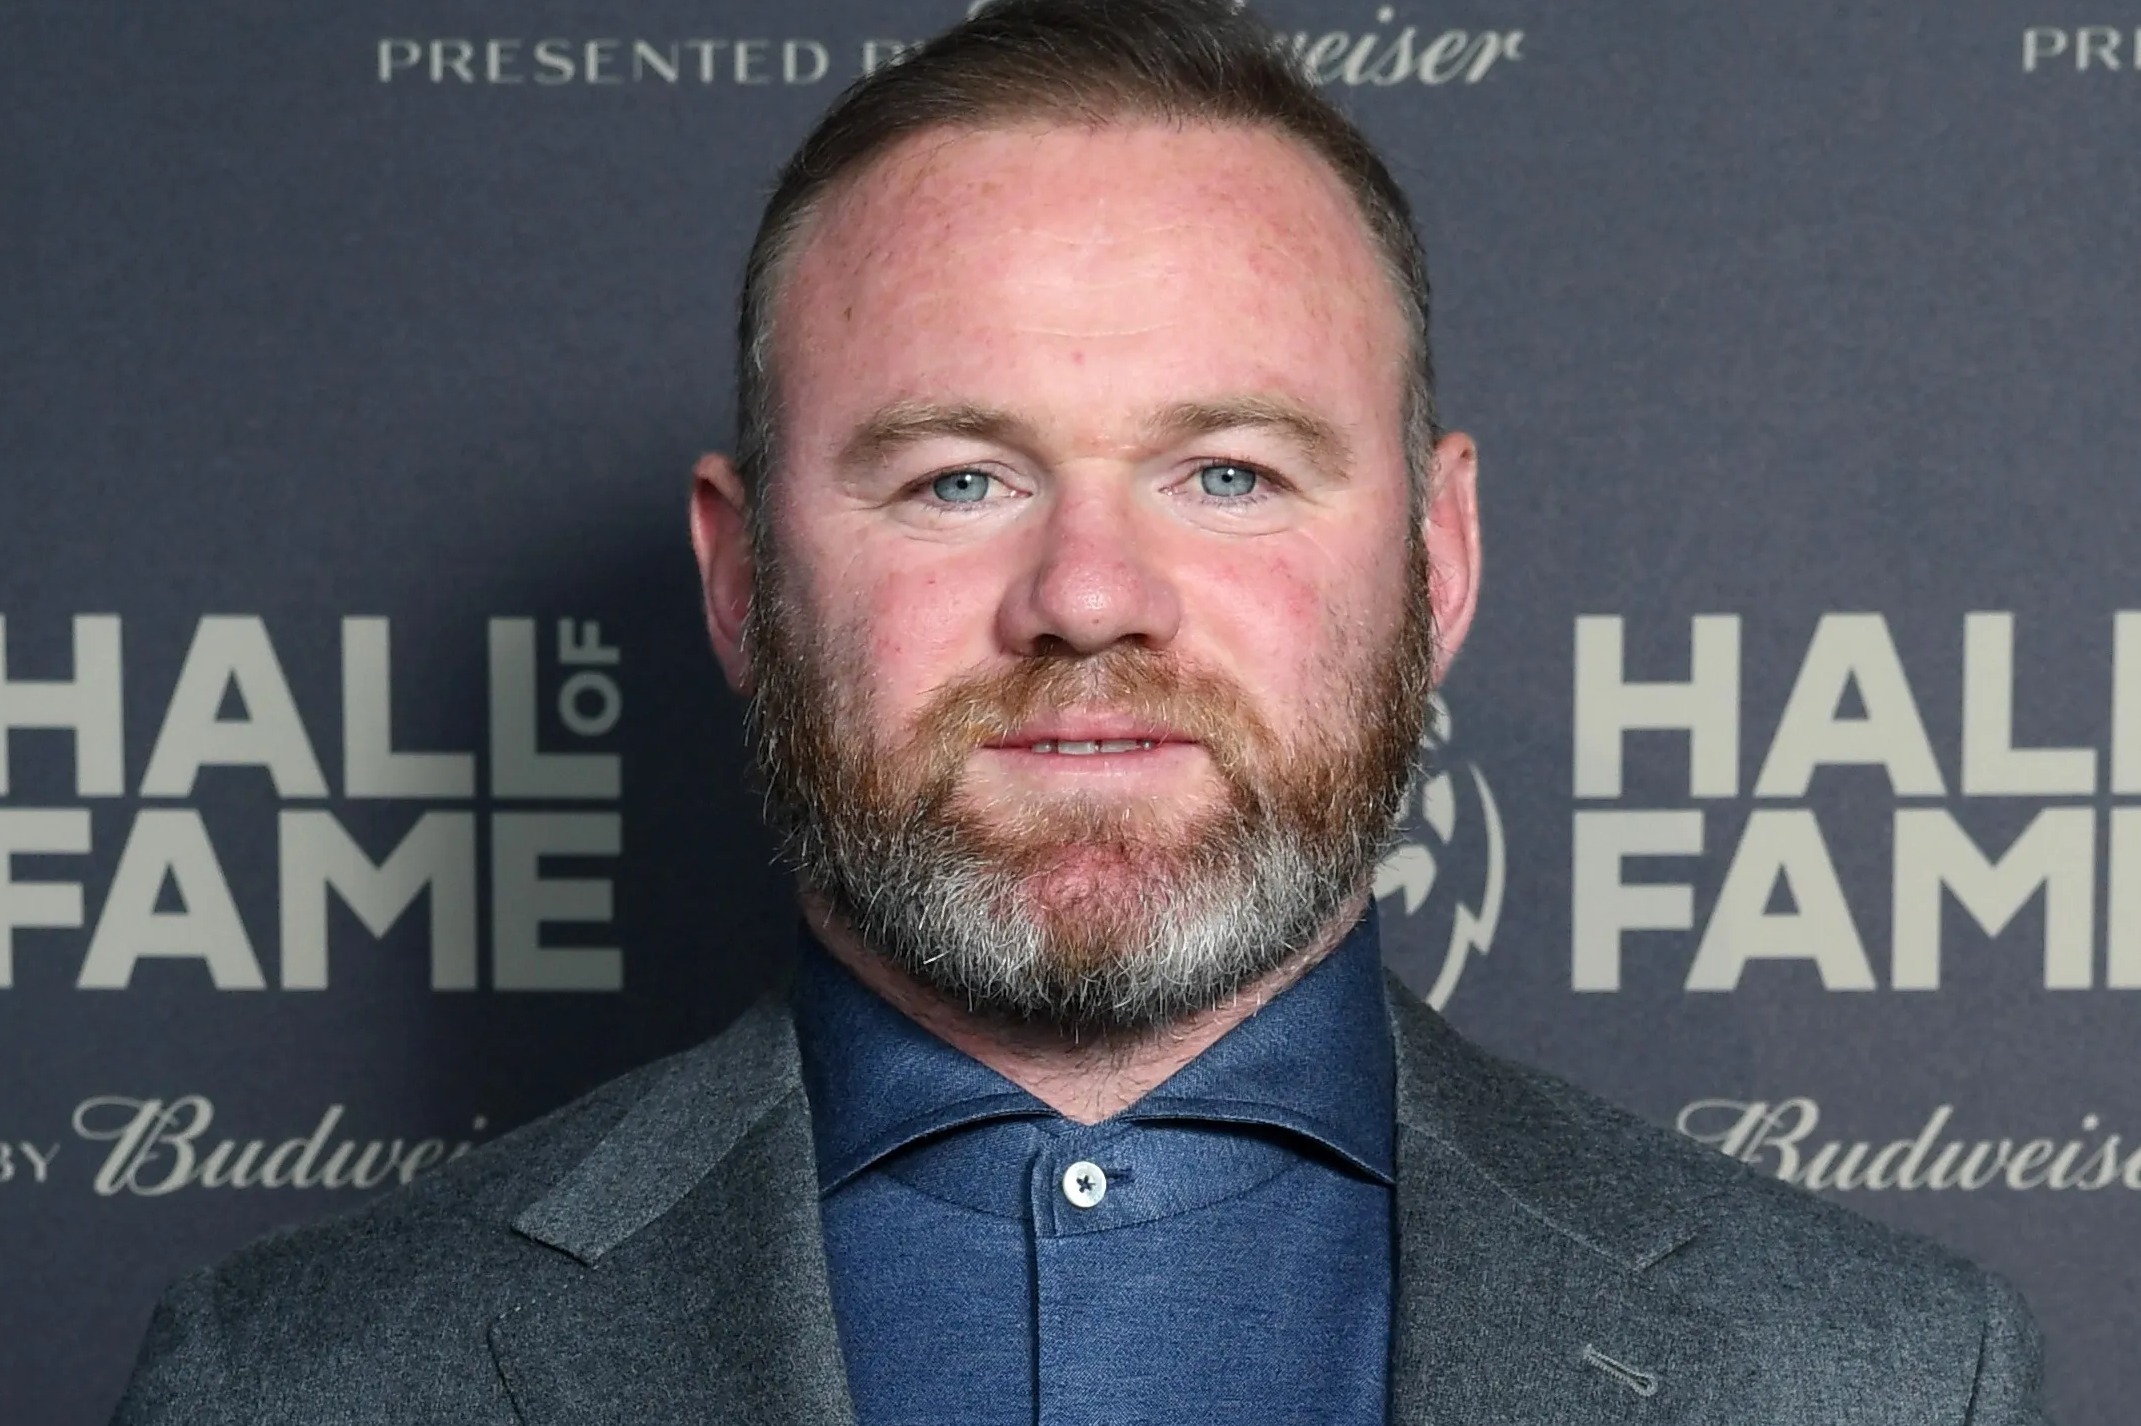 Wayne Rooney's hobby revealed after claim he is 'obsessed' with documentary